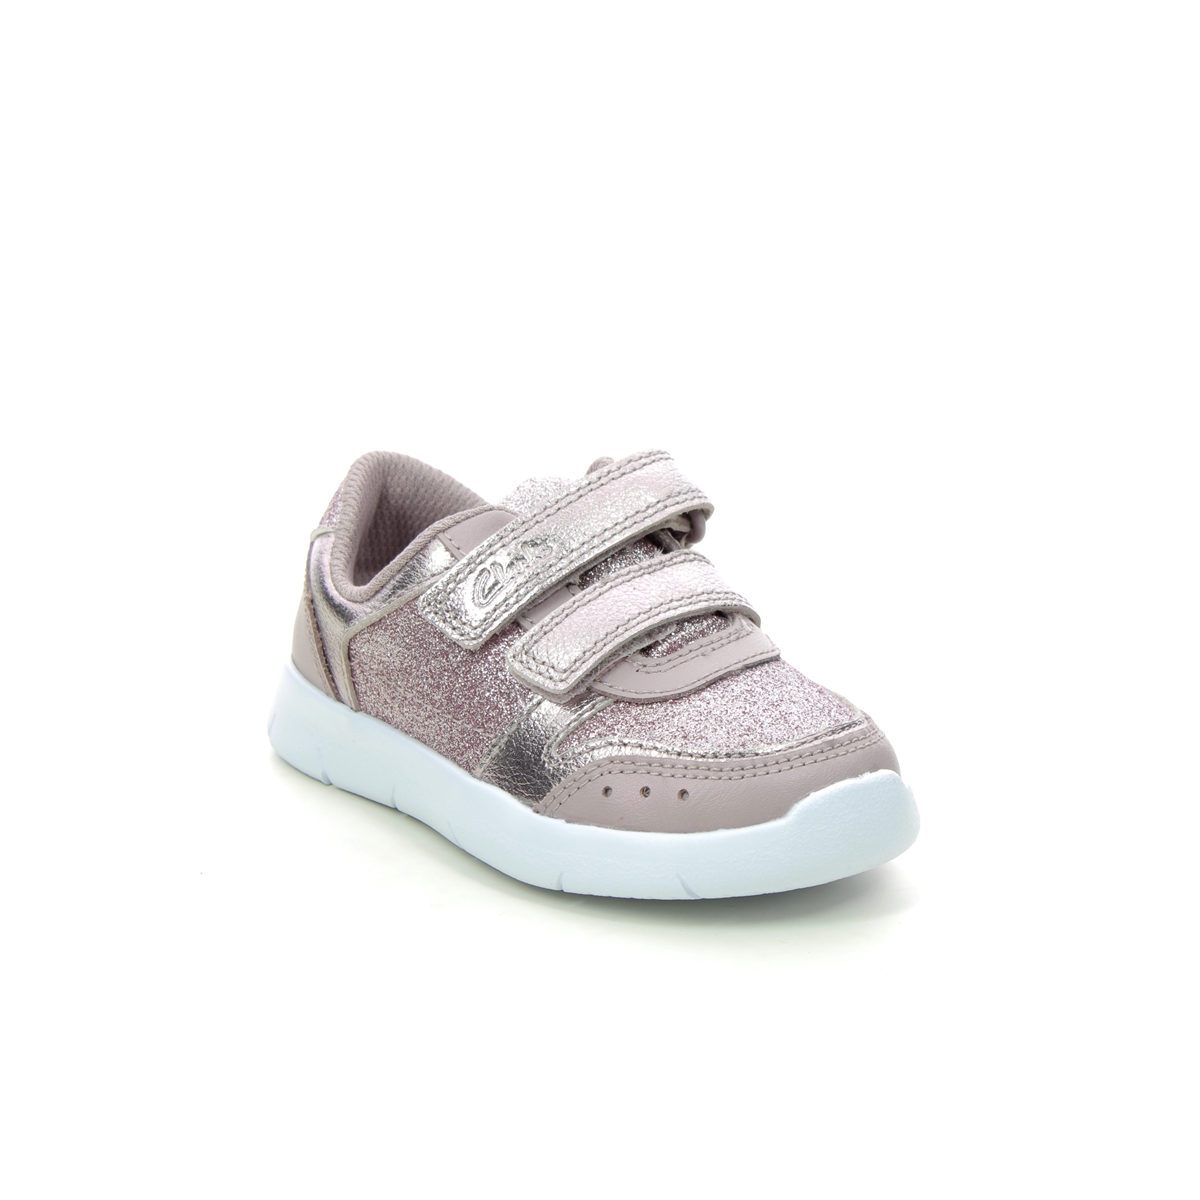 Clarks Ath Sonar T Pink Kids Toddler Girls Trainers 683727G In Size 6 In Plain Pink G Width Fitting For kids